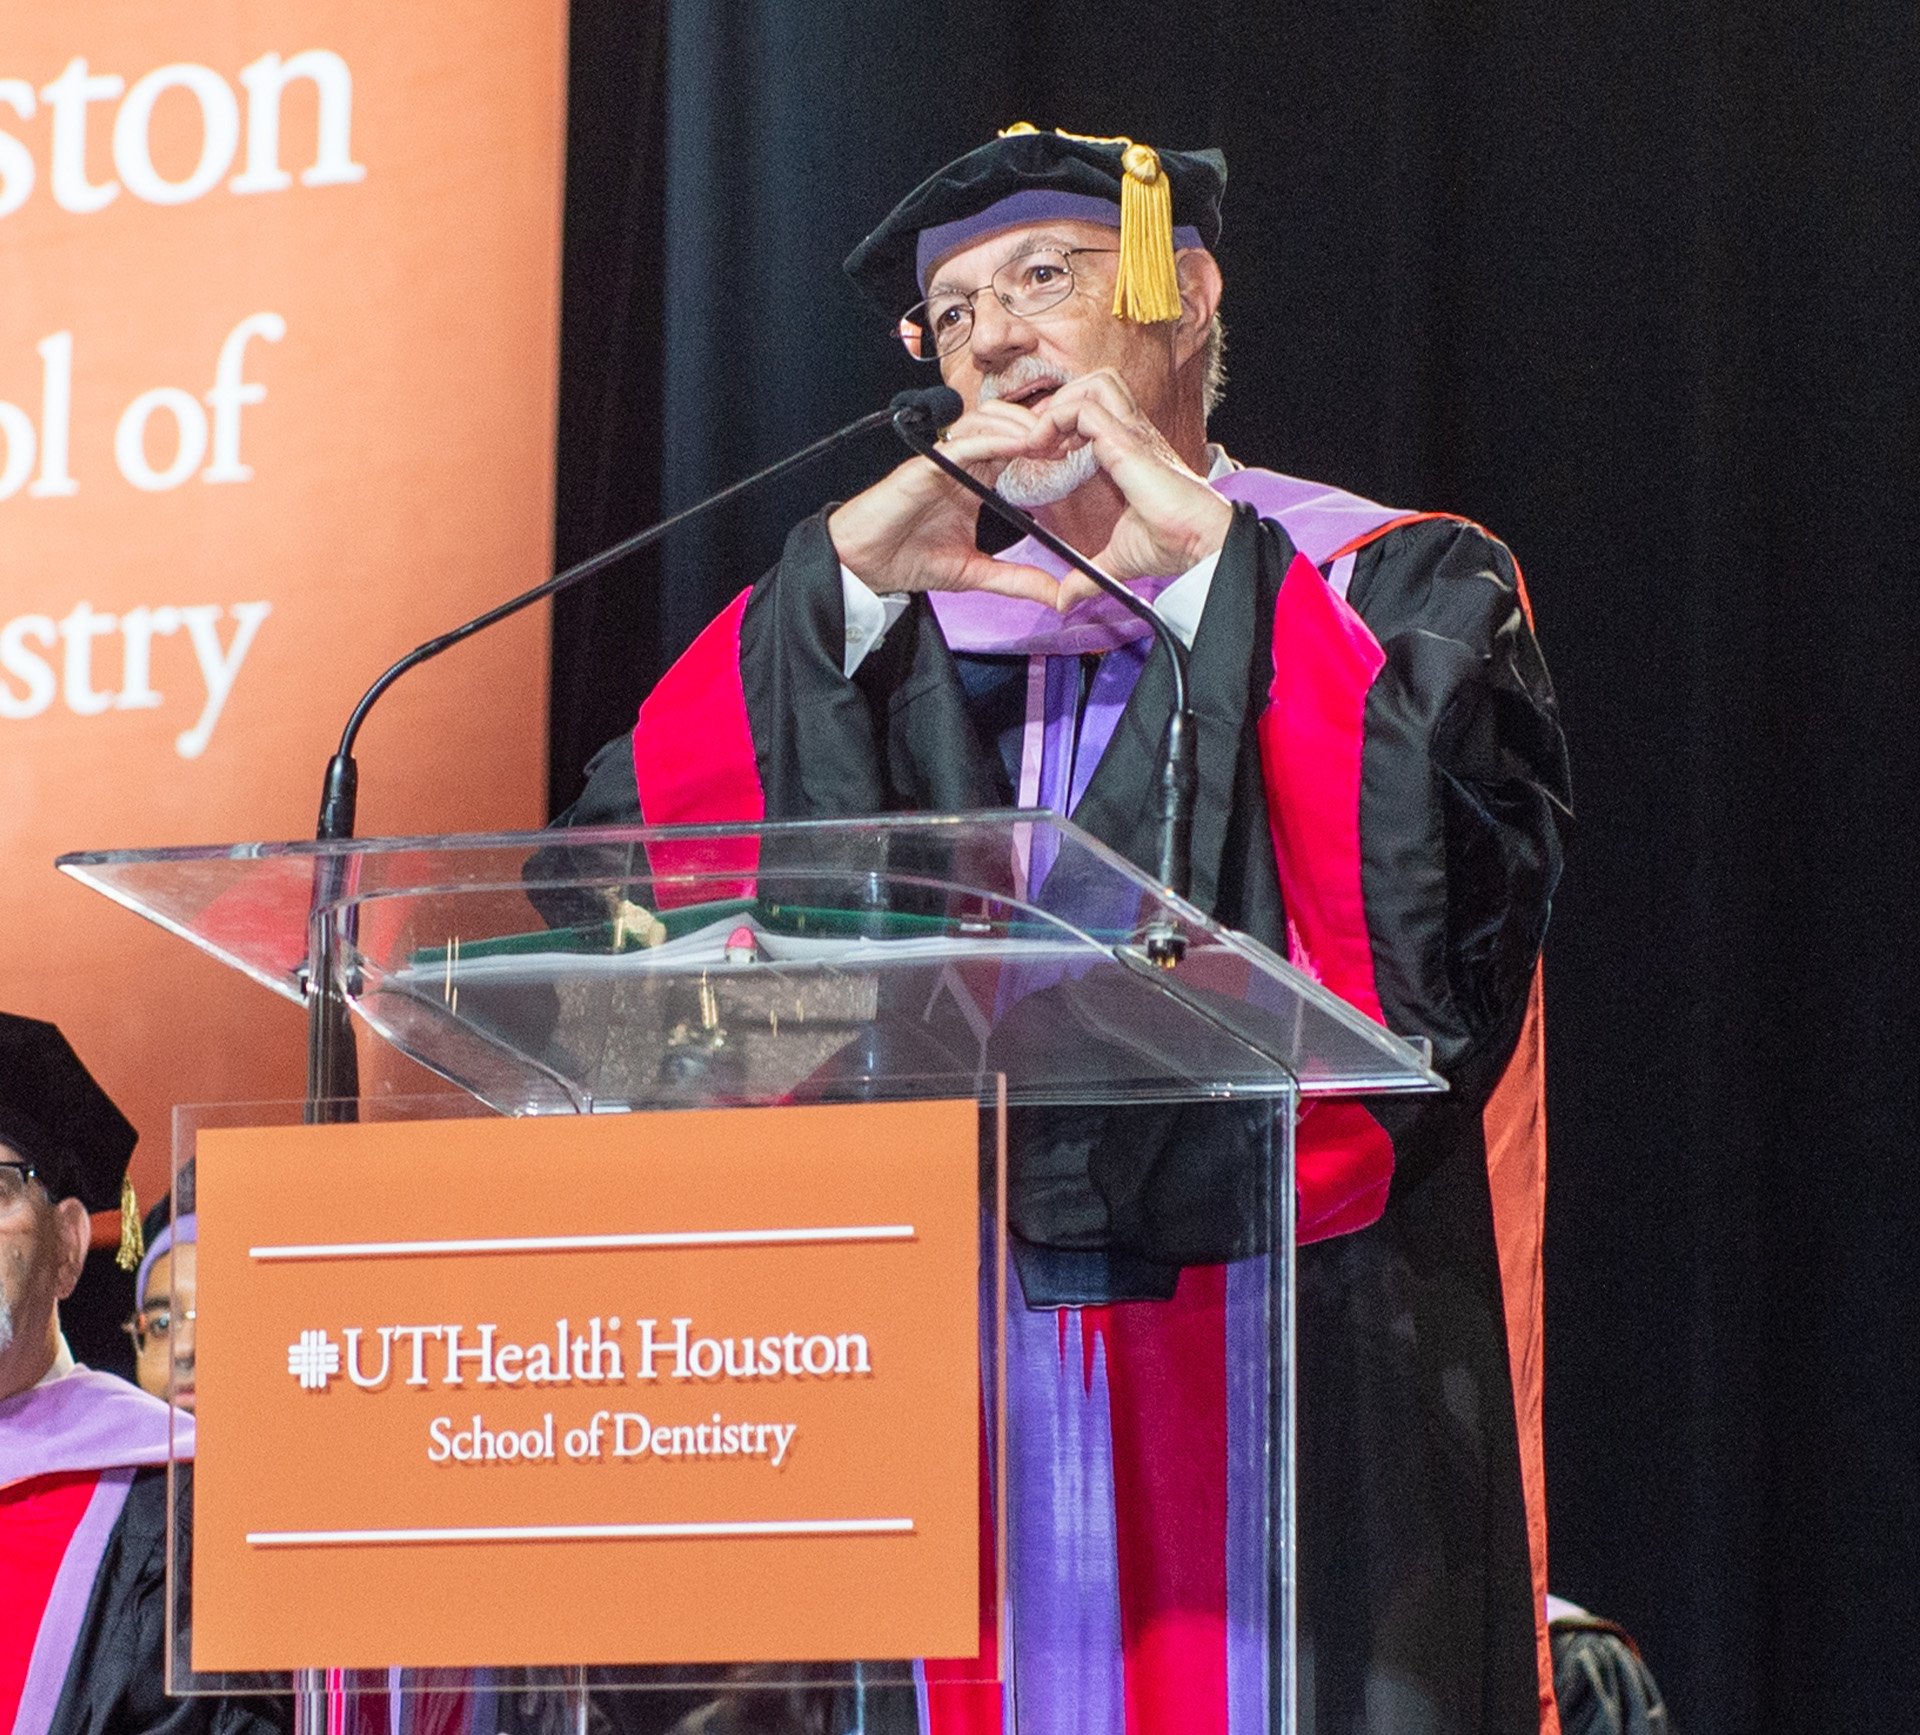 Scott R. Makins, DDS ’80, MS, makes a heart shape with his hands while delivering the inspirational message at UTHealth Houston School of Dentistry’s 119th Commencement Ceremony.